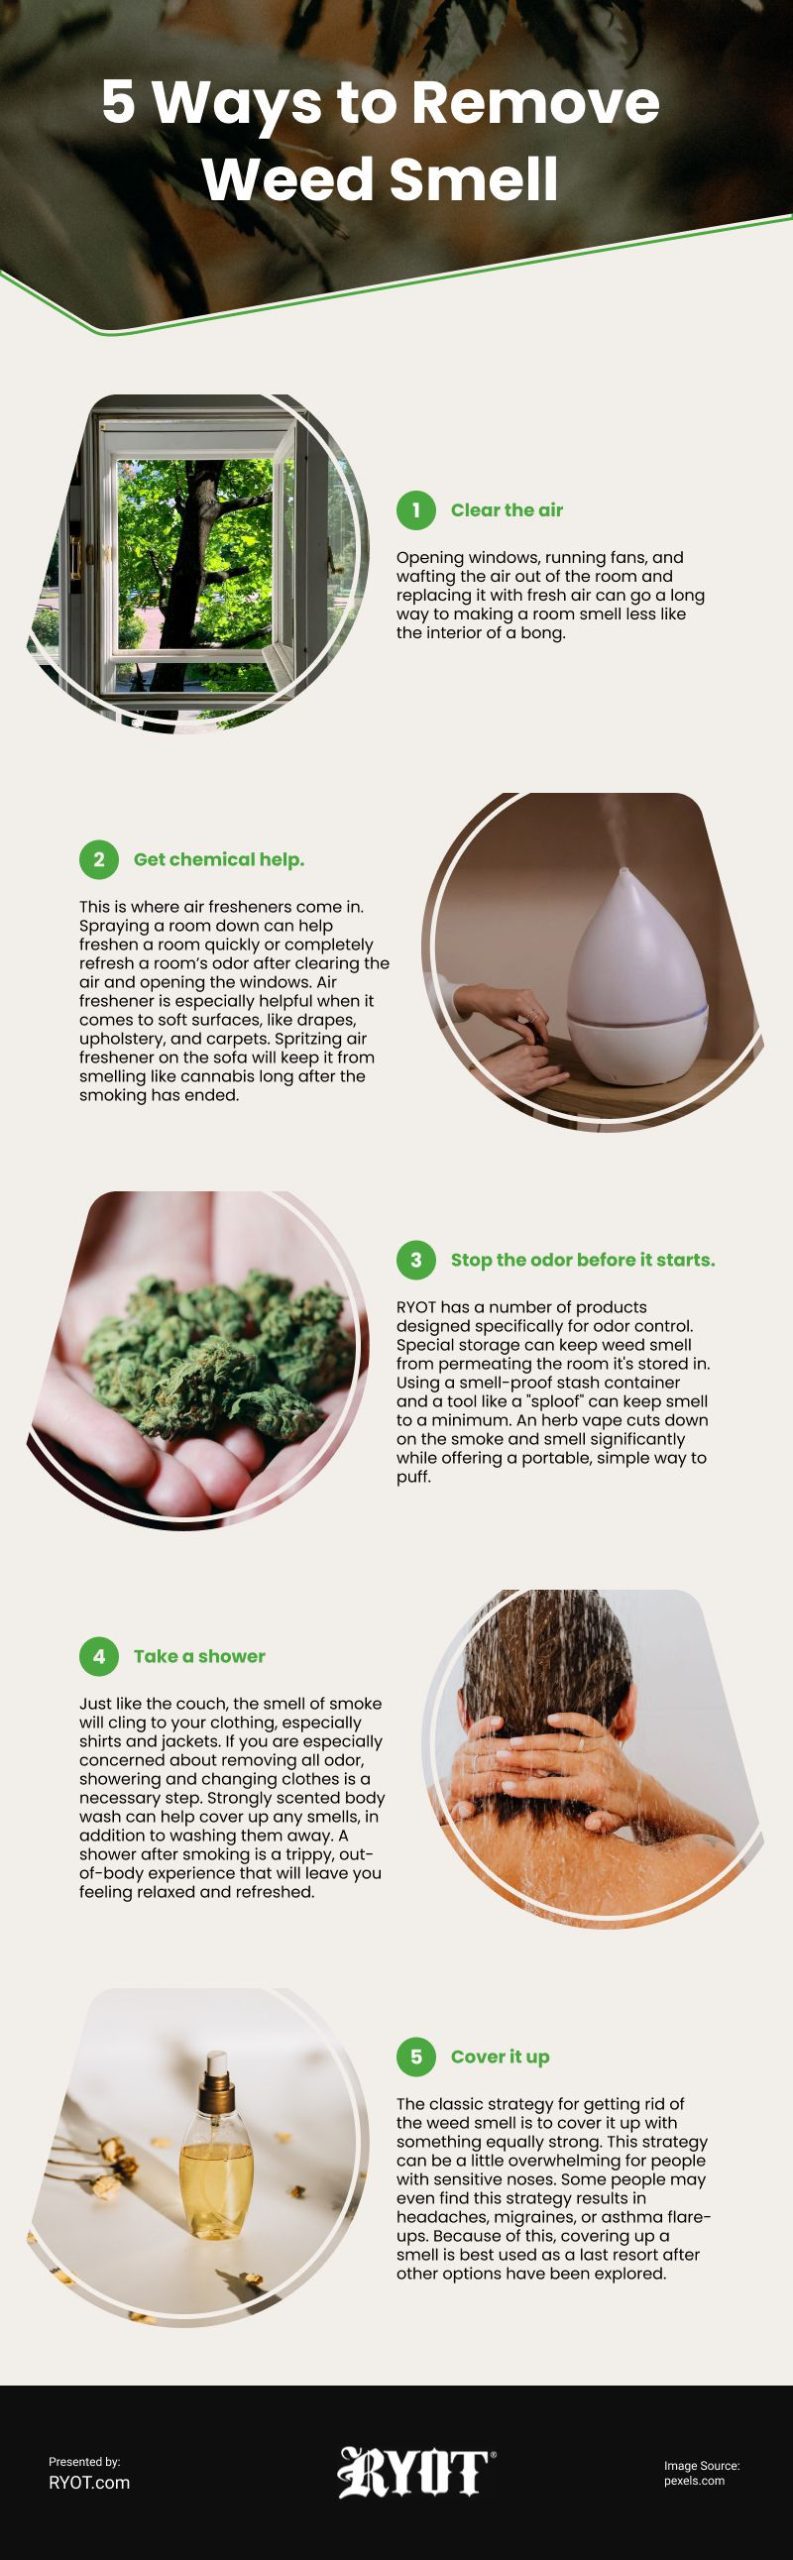 5 Ways to Remove Weed Smell Infographic